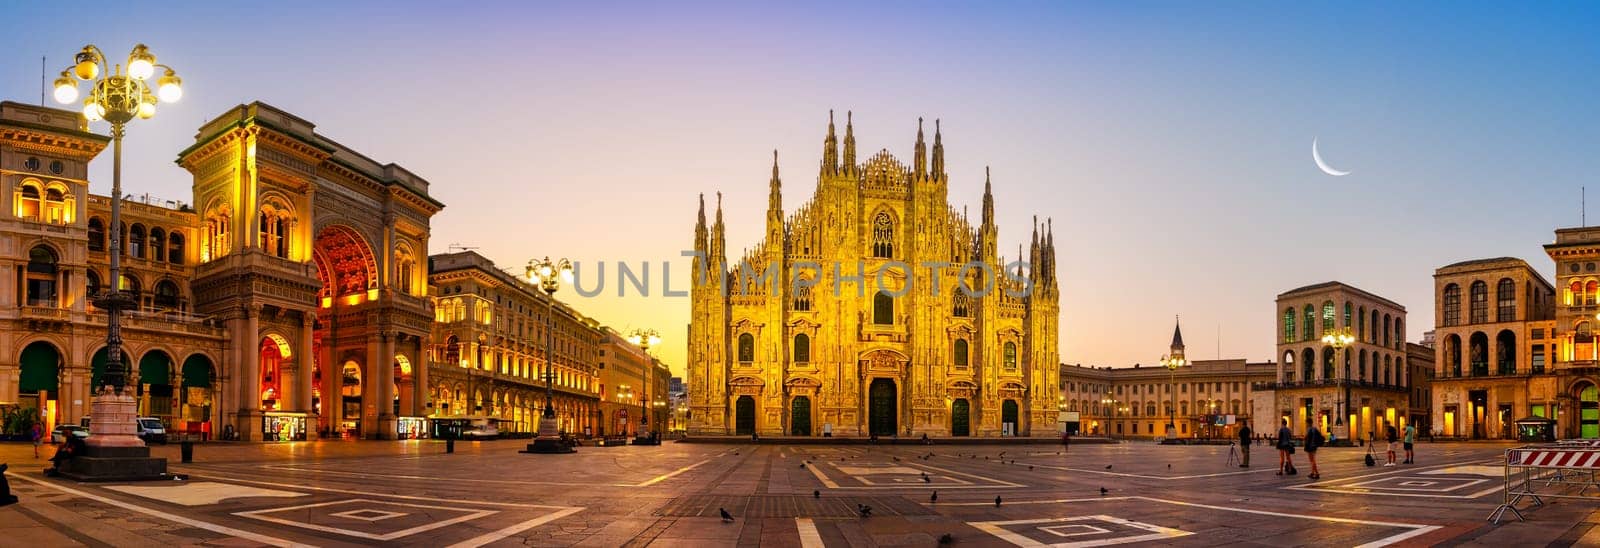 Piazza del Duomo, Cathedral Square, with Milan Cathedral or Duomo di Milano in the morning, Milan, Lombardia, Italy